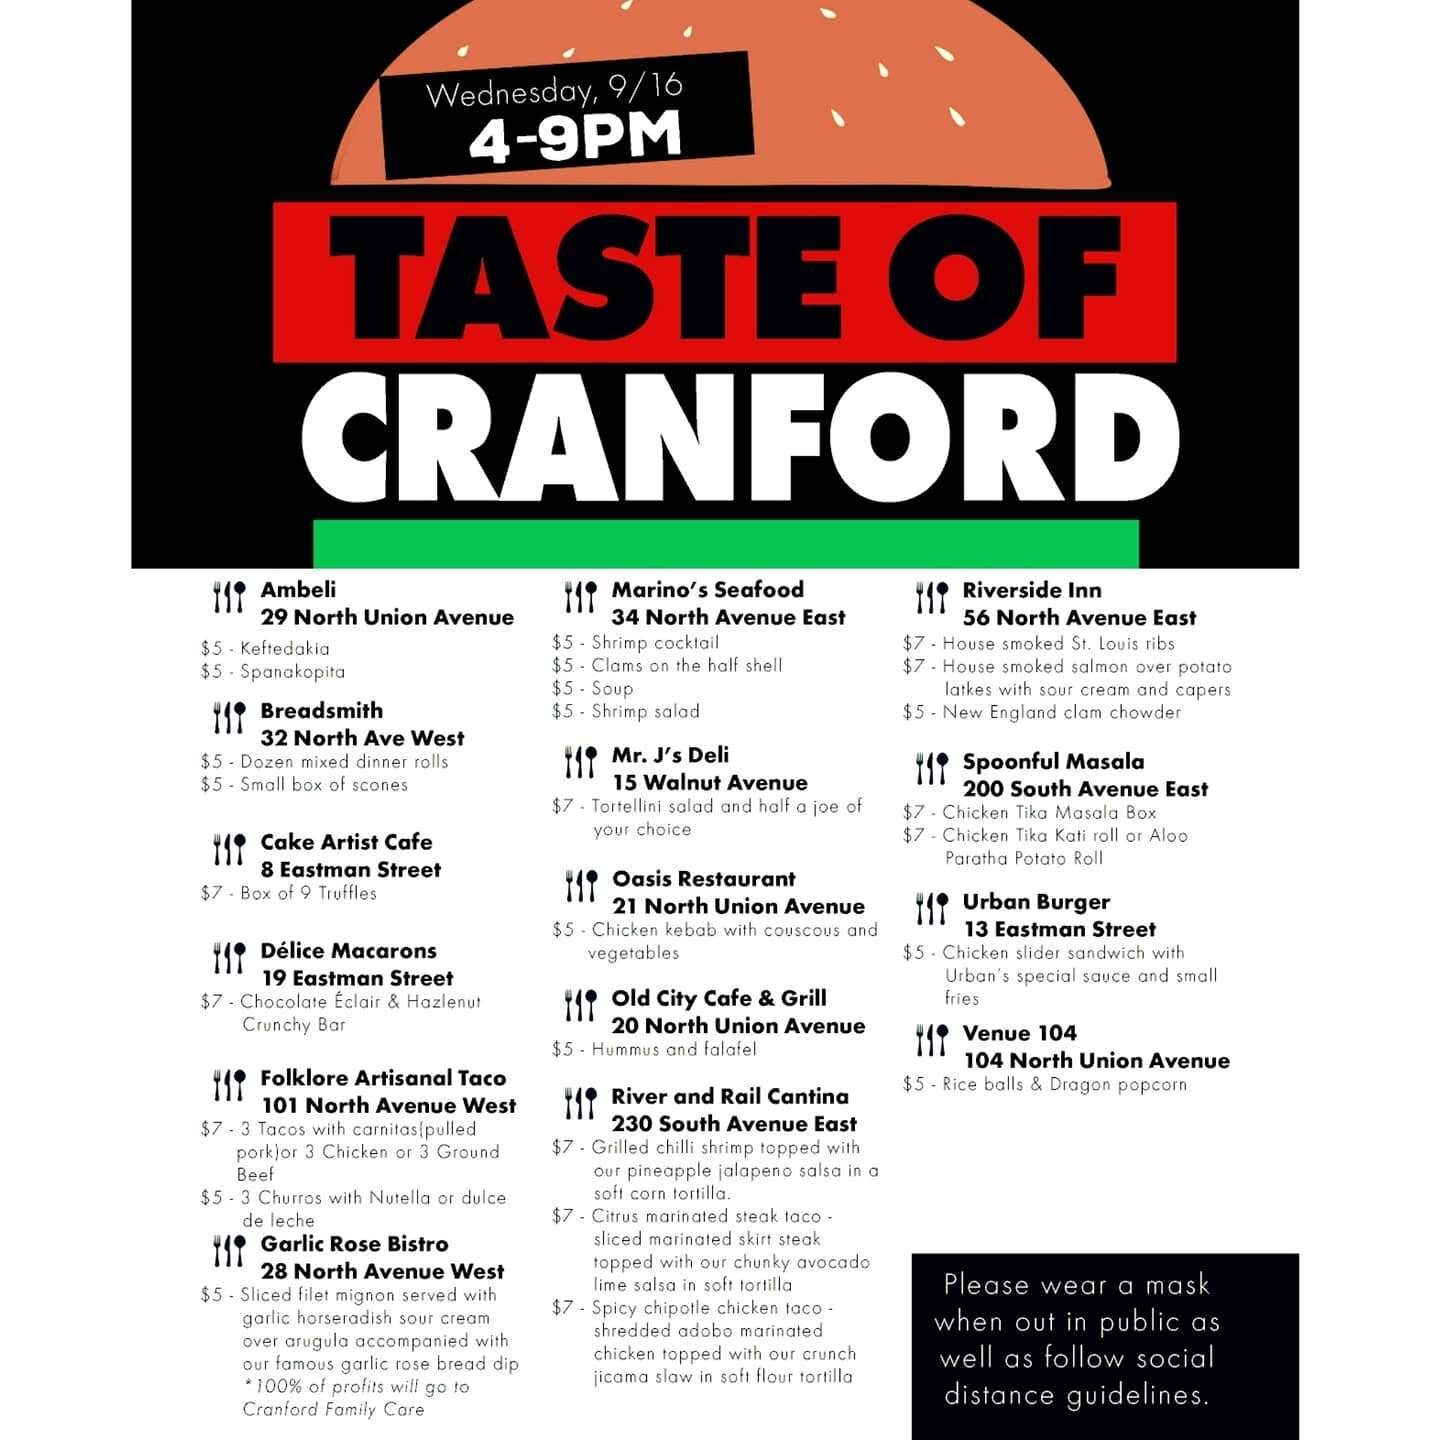 Taste of Cranford is next Wednesday - who's getting excited?? We're thrilled to share the list of participating restaurants, as well as the delicious dishes they're serving up. Dishes are priced between $5-$7 so you have the opportunity to sample foo